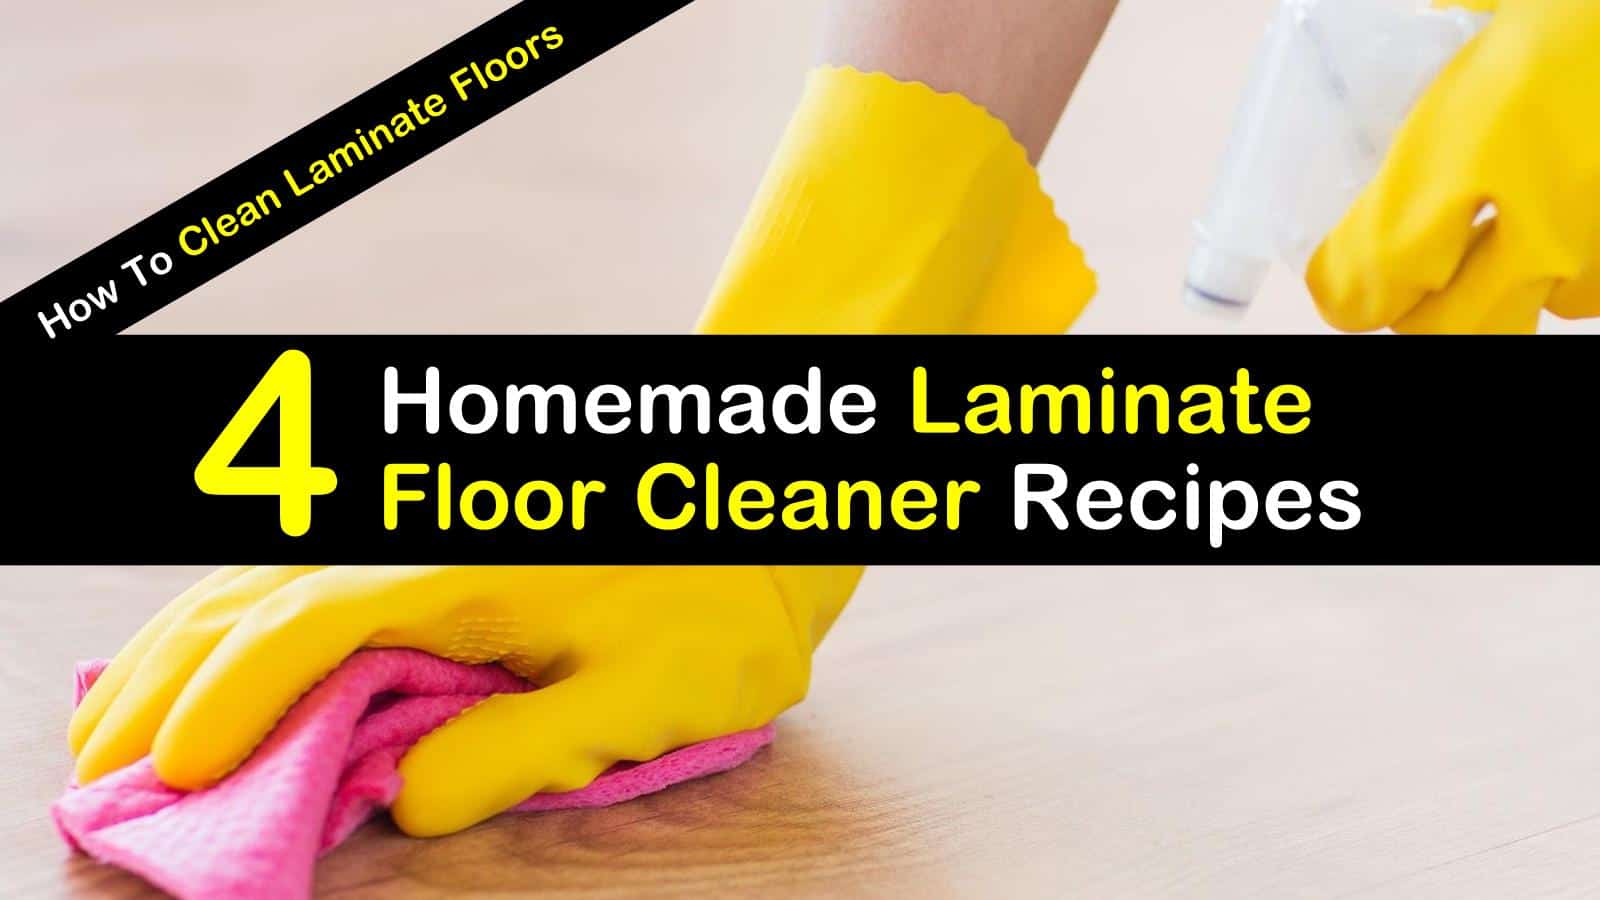 How To Clean Laminate Floors 4, How To Clean Laminate Floors Safely